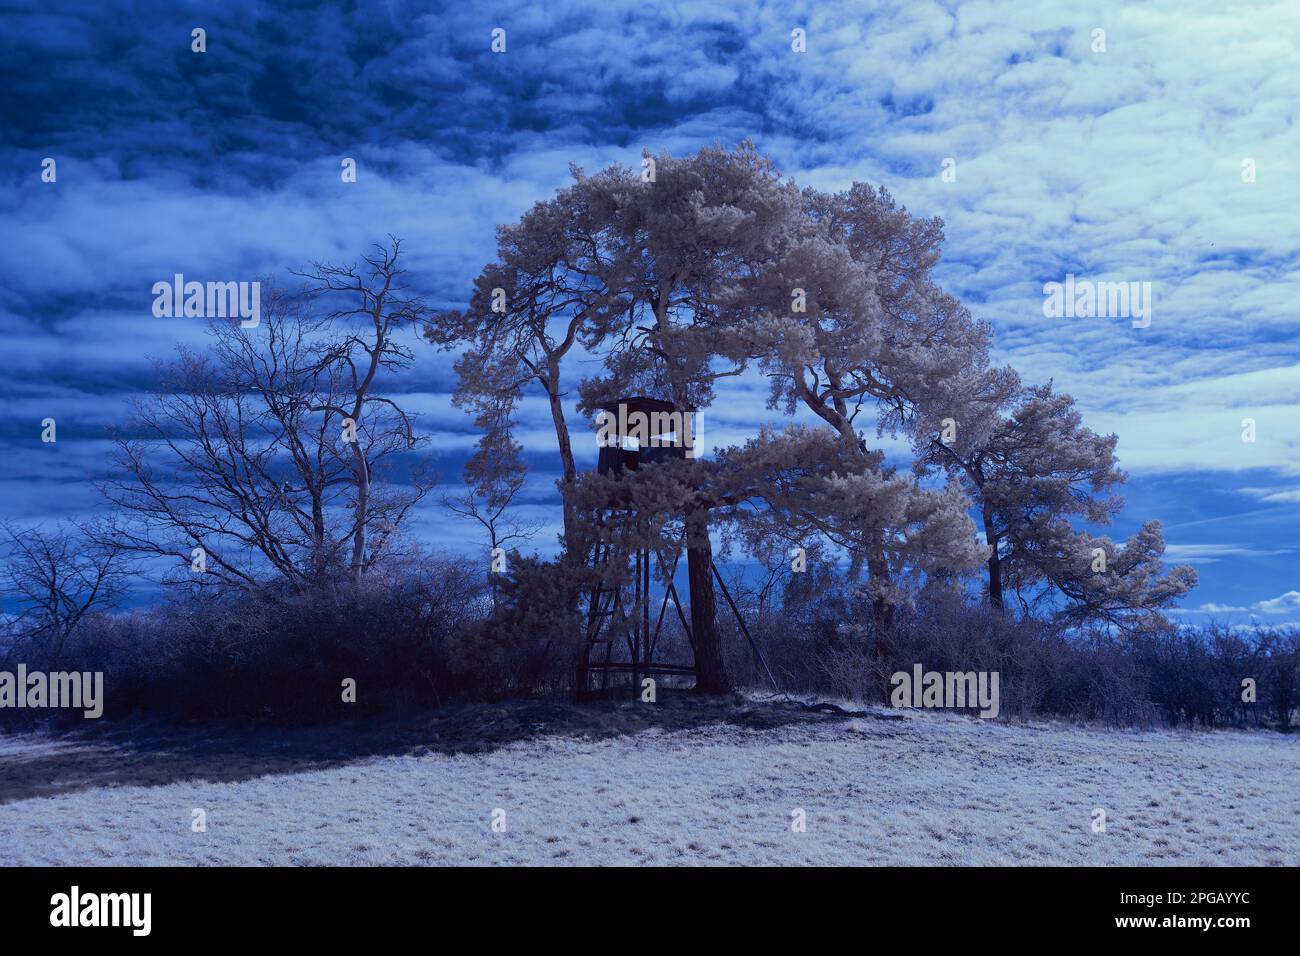 infrared photography - ir photo of landscape under sky with clouds - the art of our world in the infrared spectrum Stock Photo